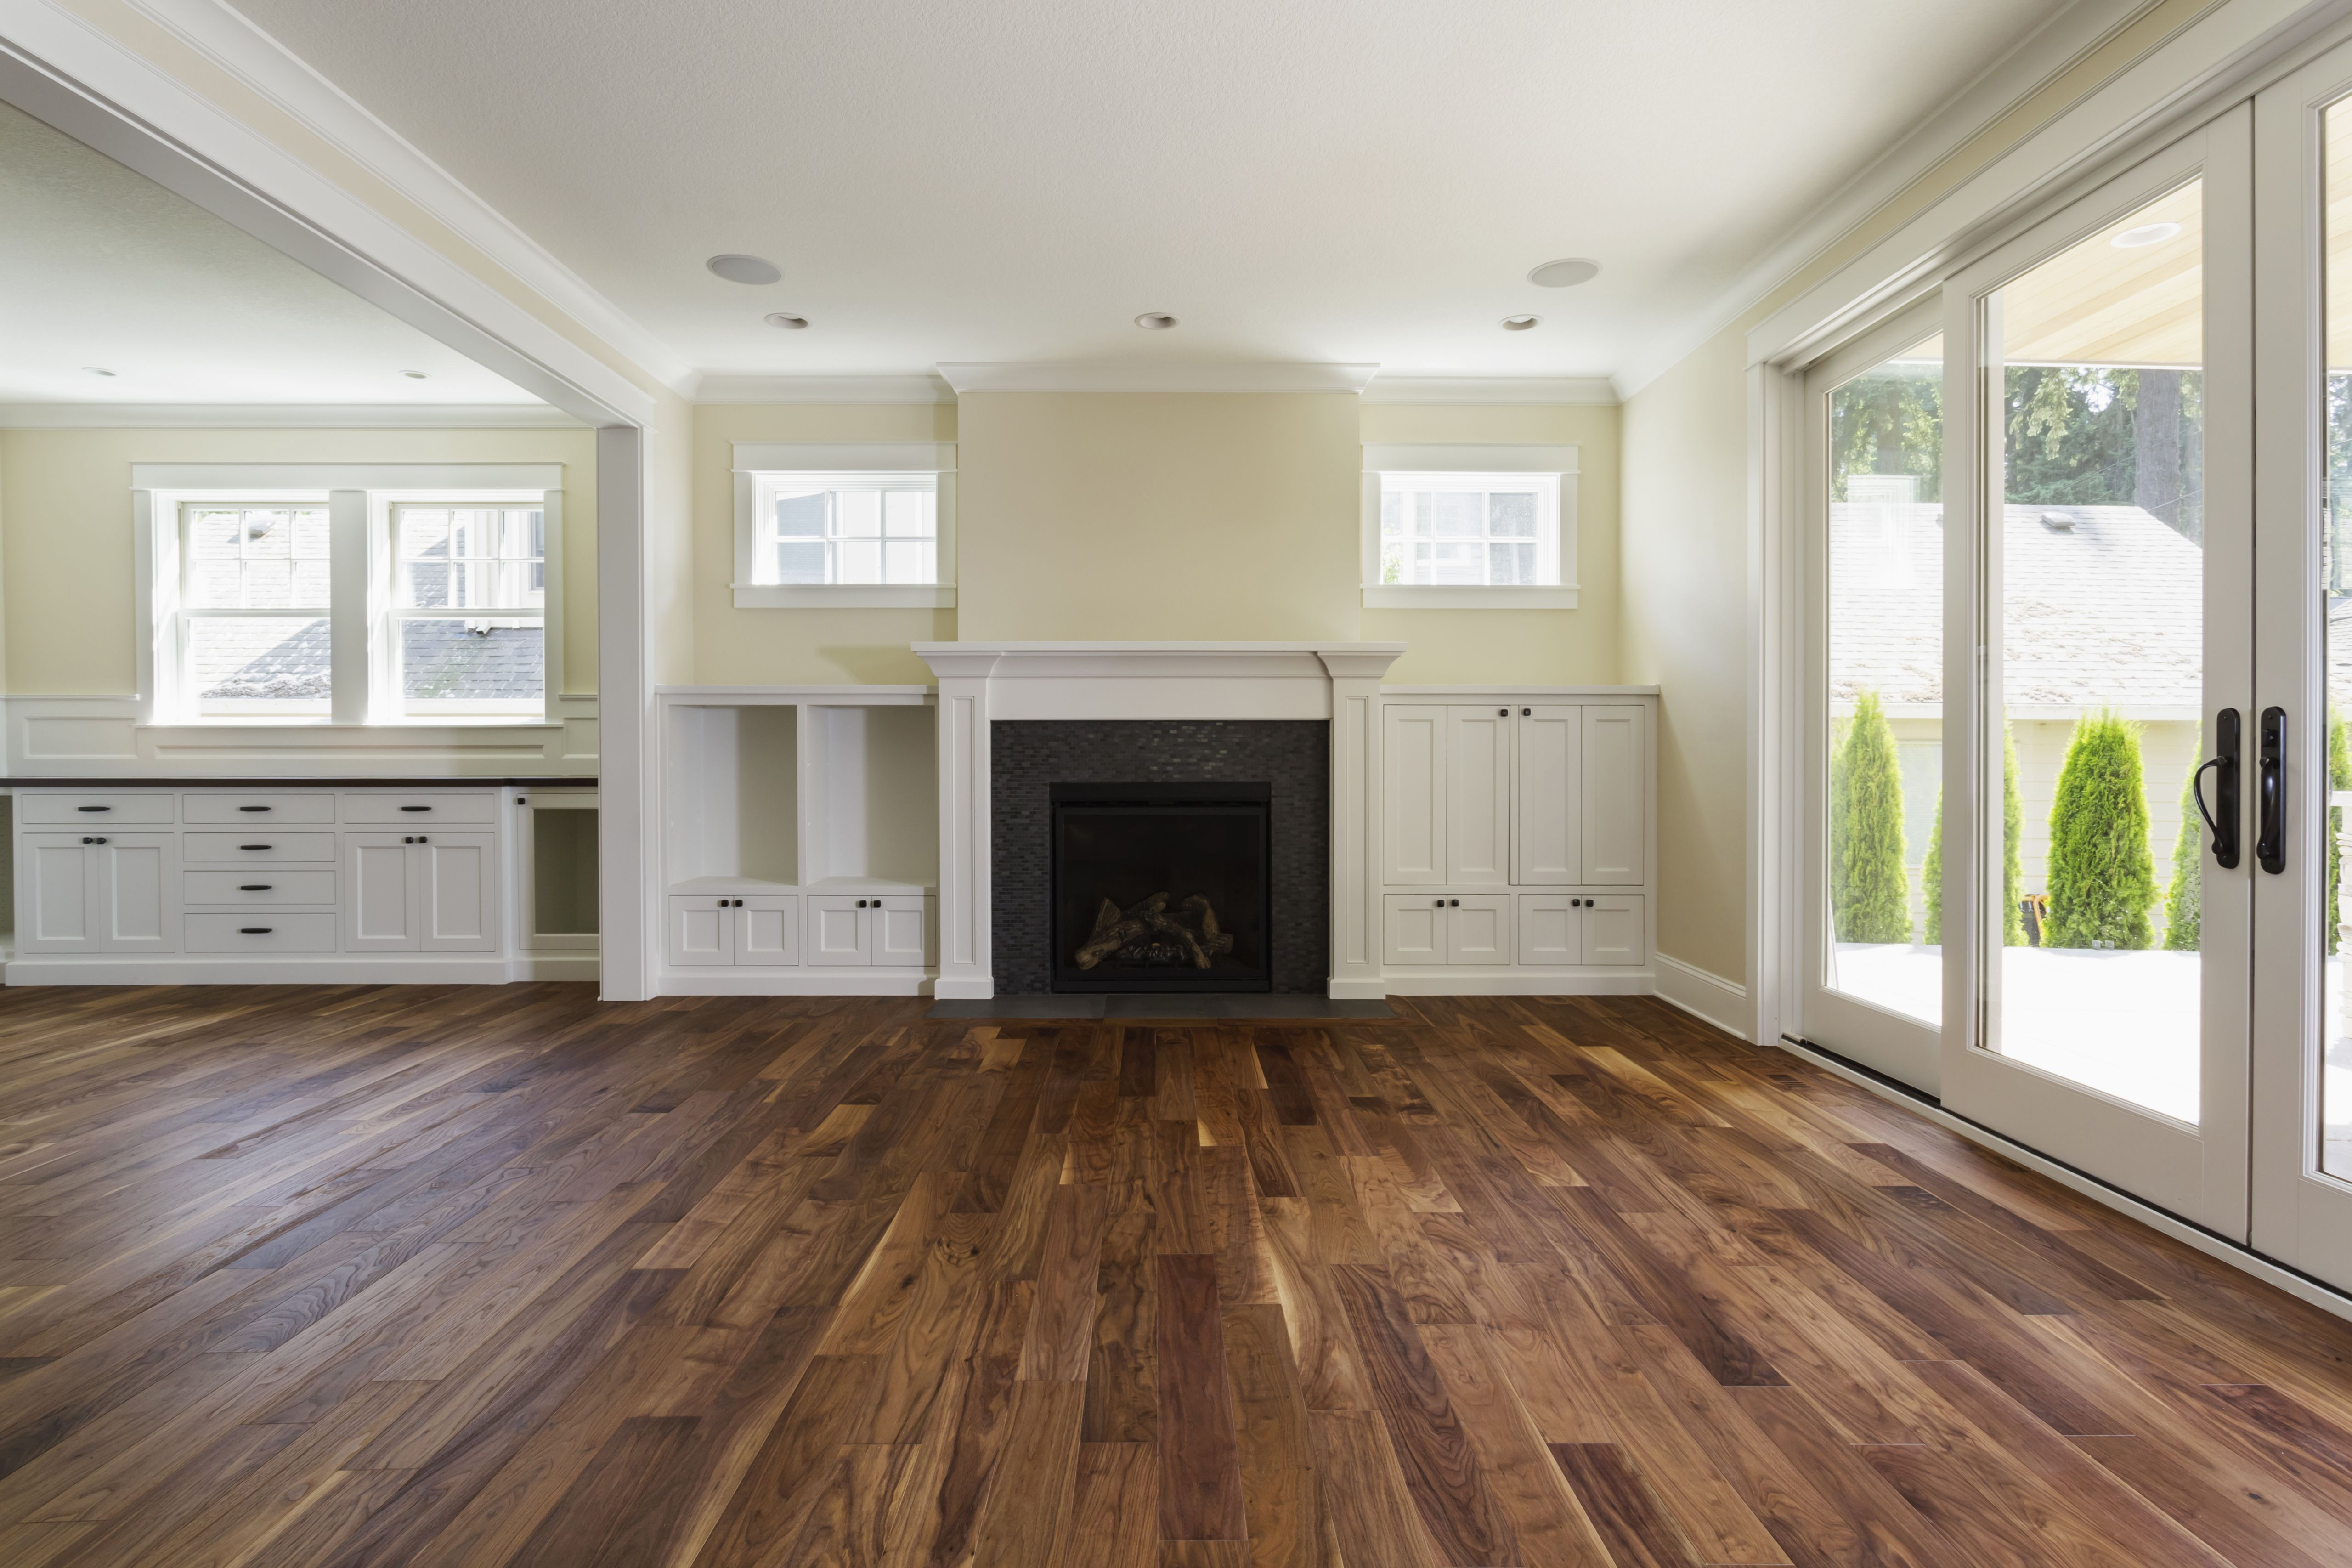 28 Fantastic Hickory Hardwood Flooring Prices 2024 free download hickory hardwood flooring prices of the pros and cons of prefinished hardwood flooring in fireplace and built in shelves in living room 482143011 57bef8e33df78cc16e035397